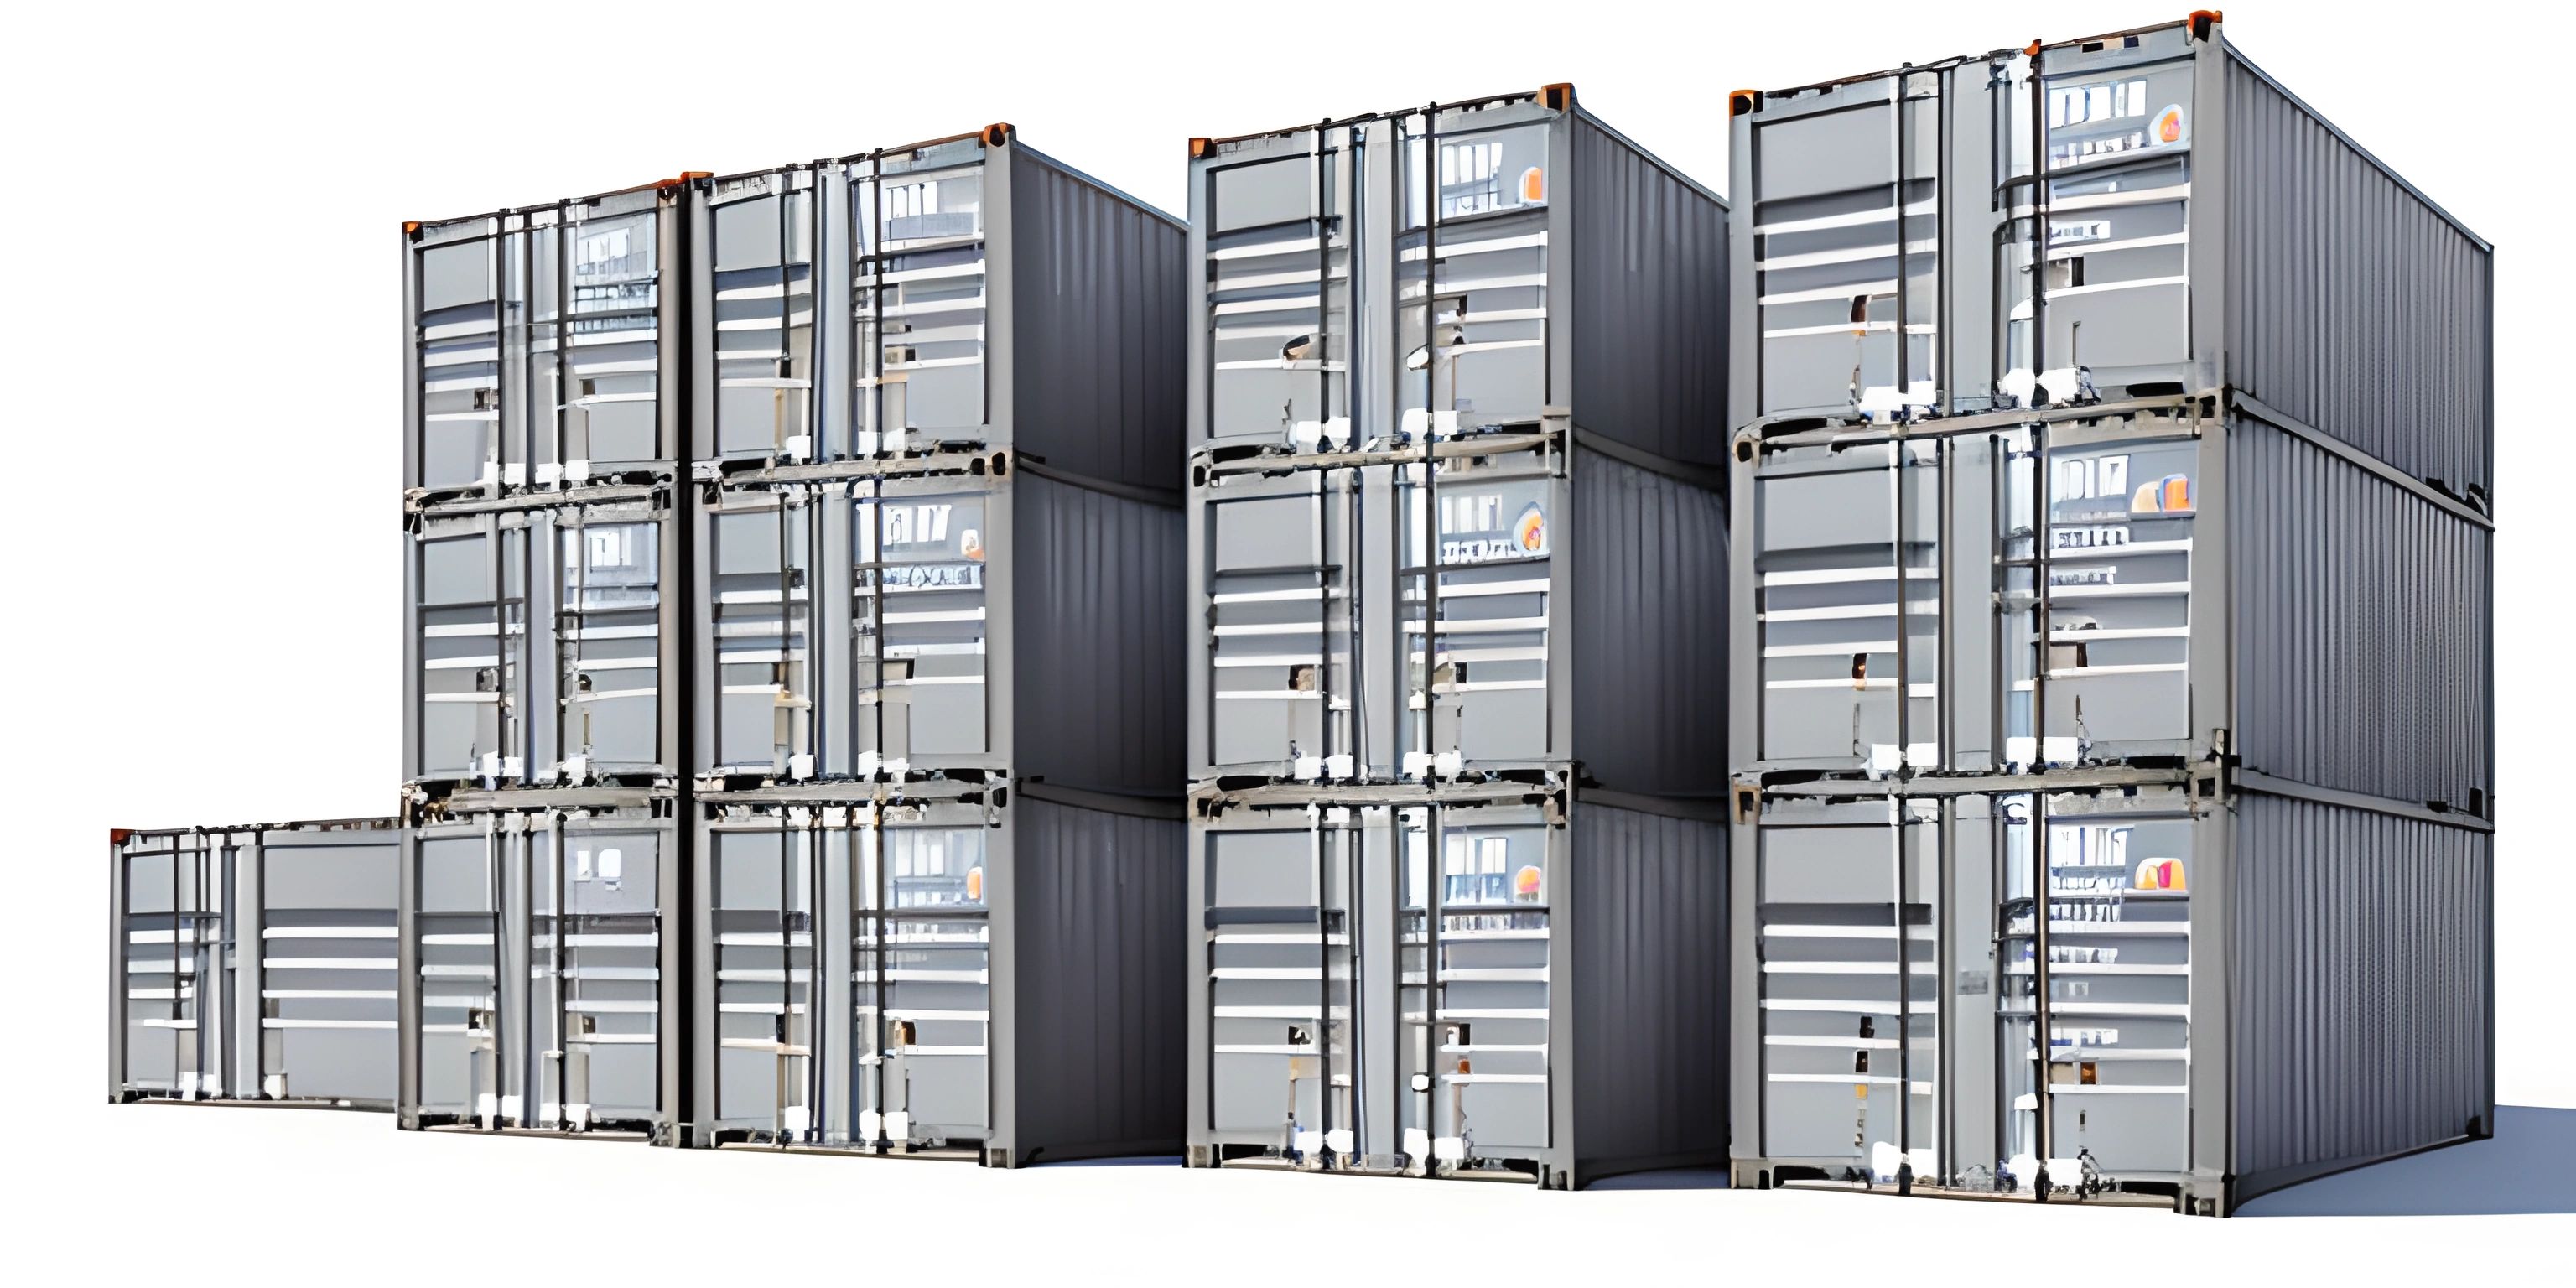 a pile of grey shipping containers in a row against a white background the boxes are stacked to form multiple stacks